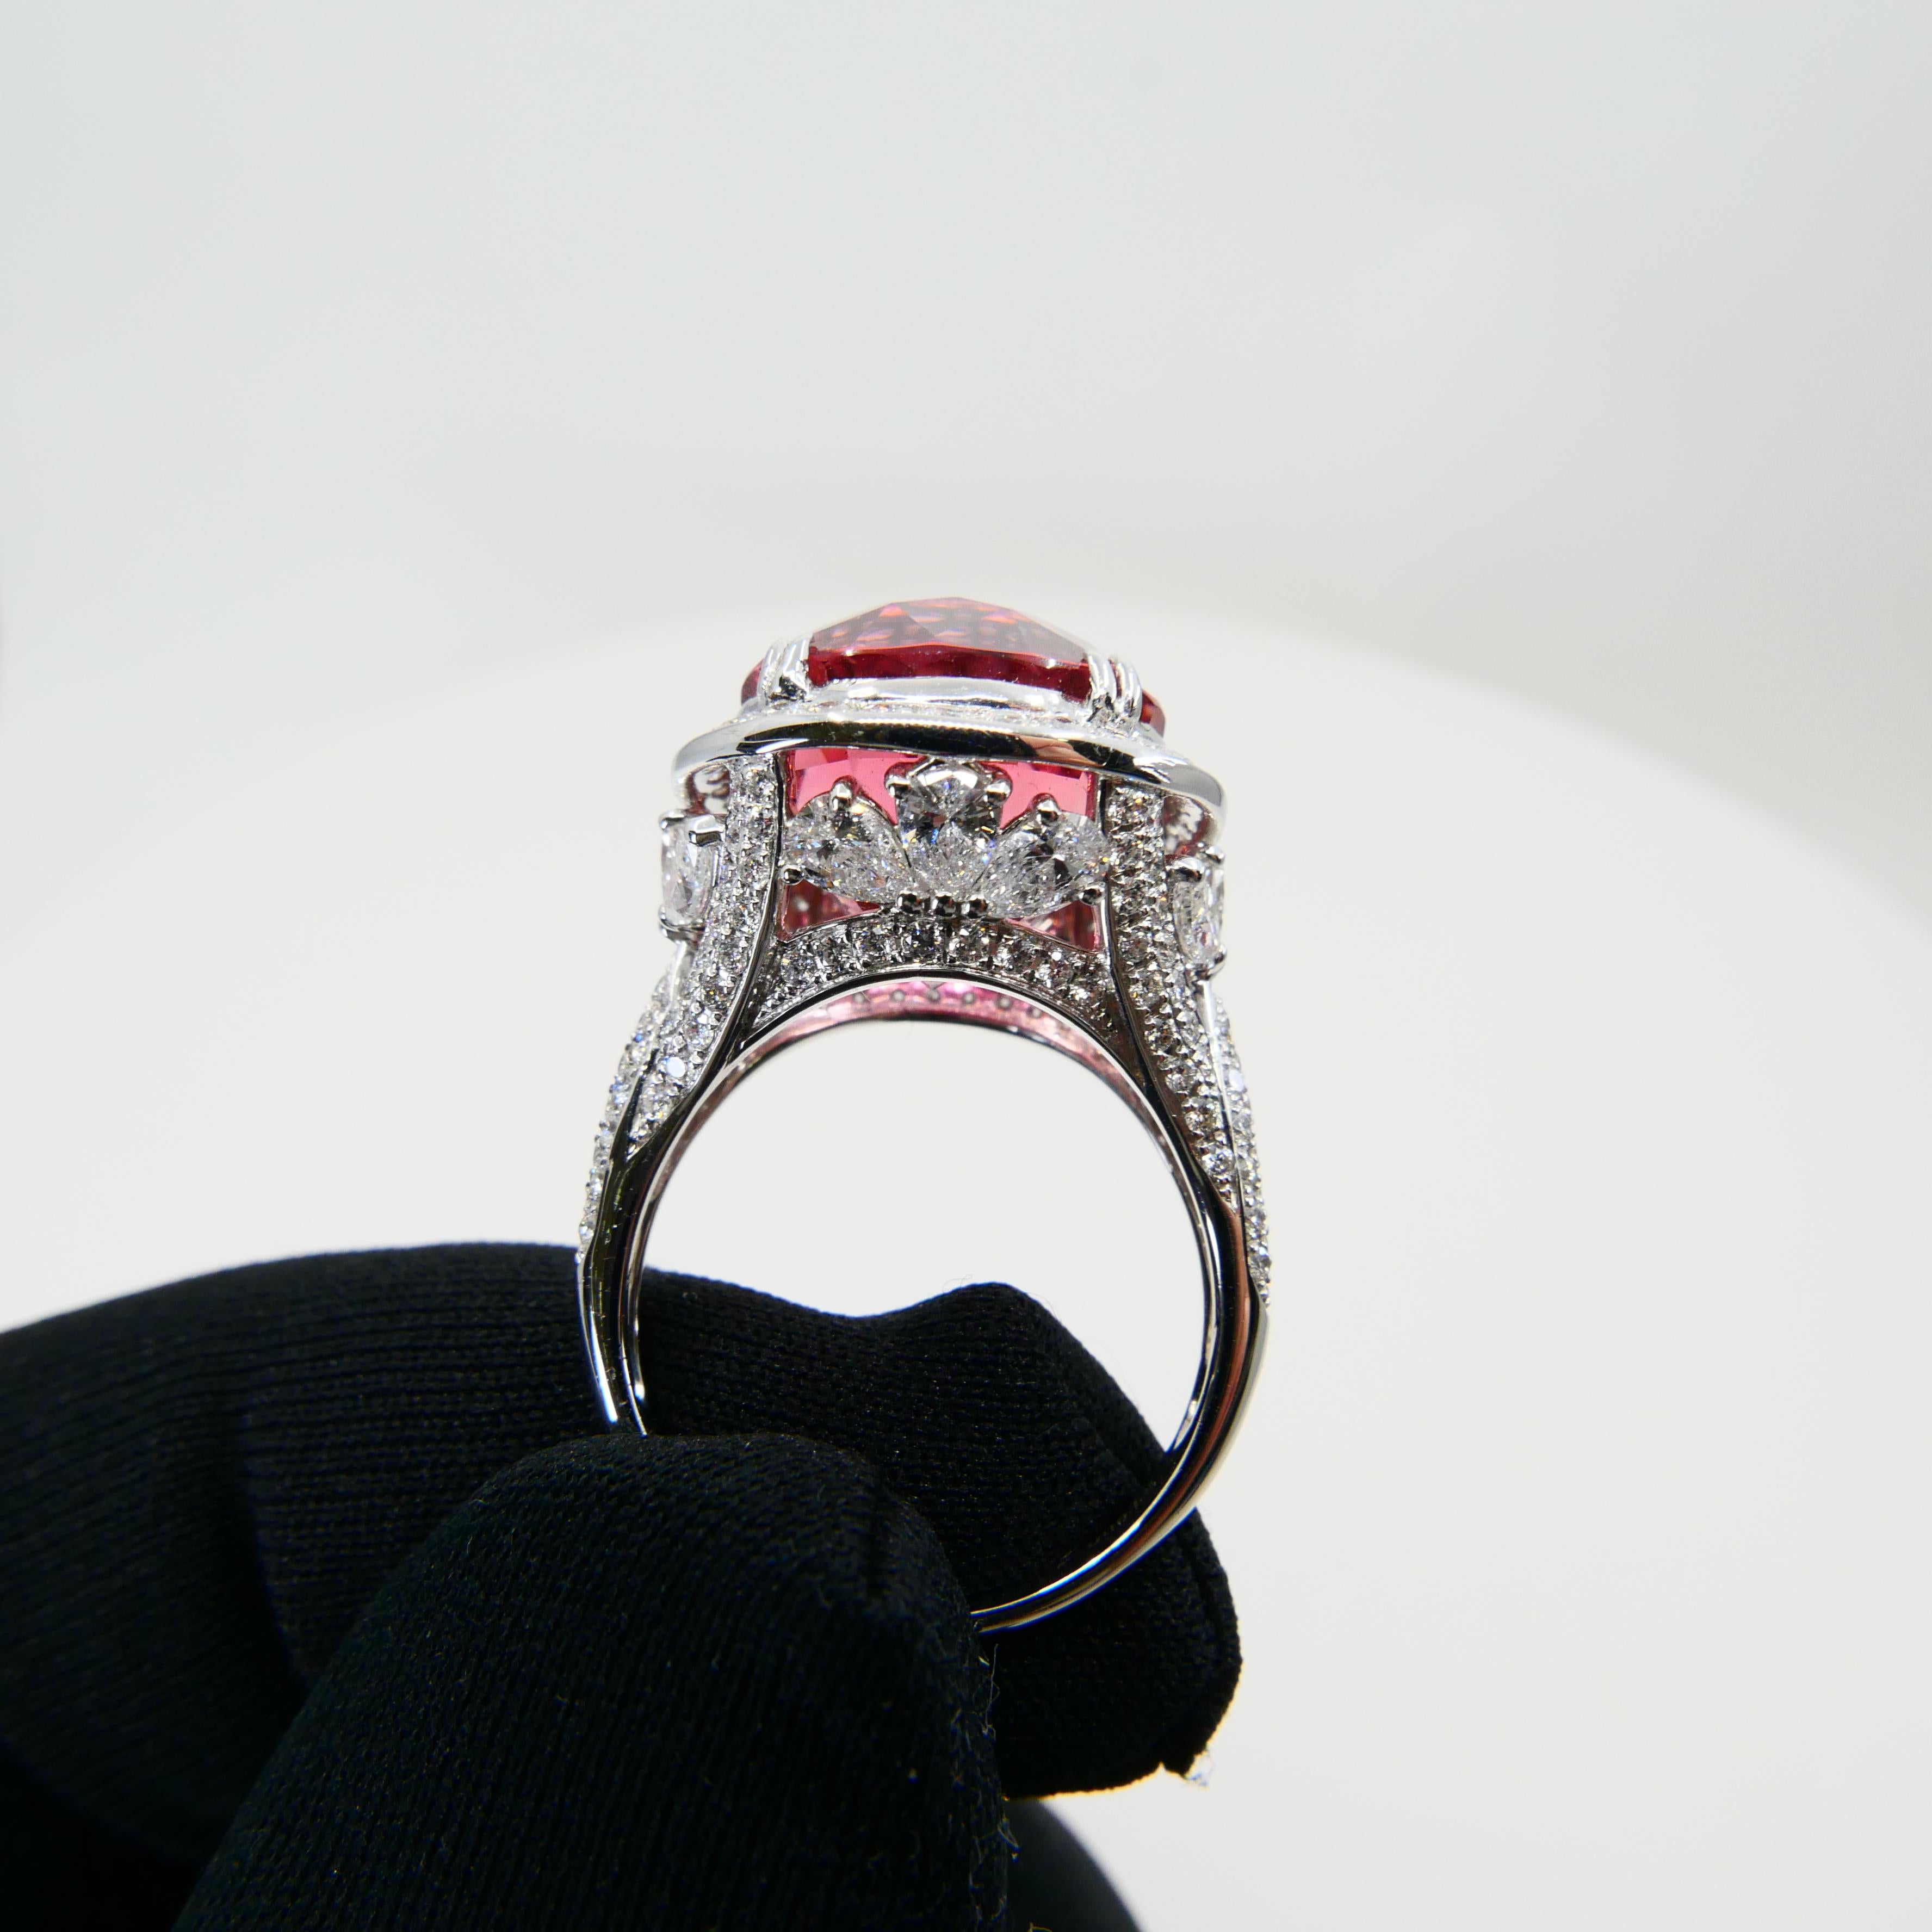 Natural 17 Cts Pink Tourmaline and Diamond Cocktail Ring, Huge Statement Piece For Sale 5